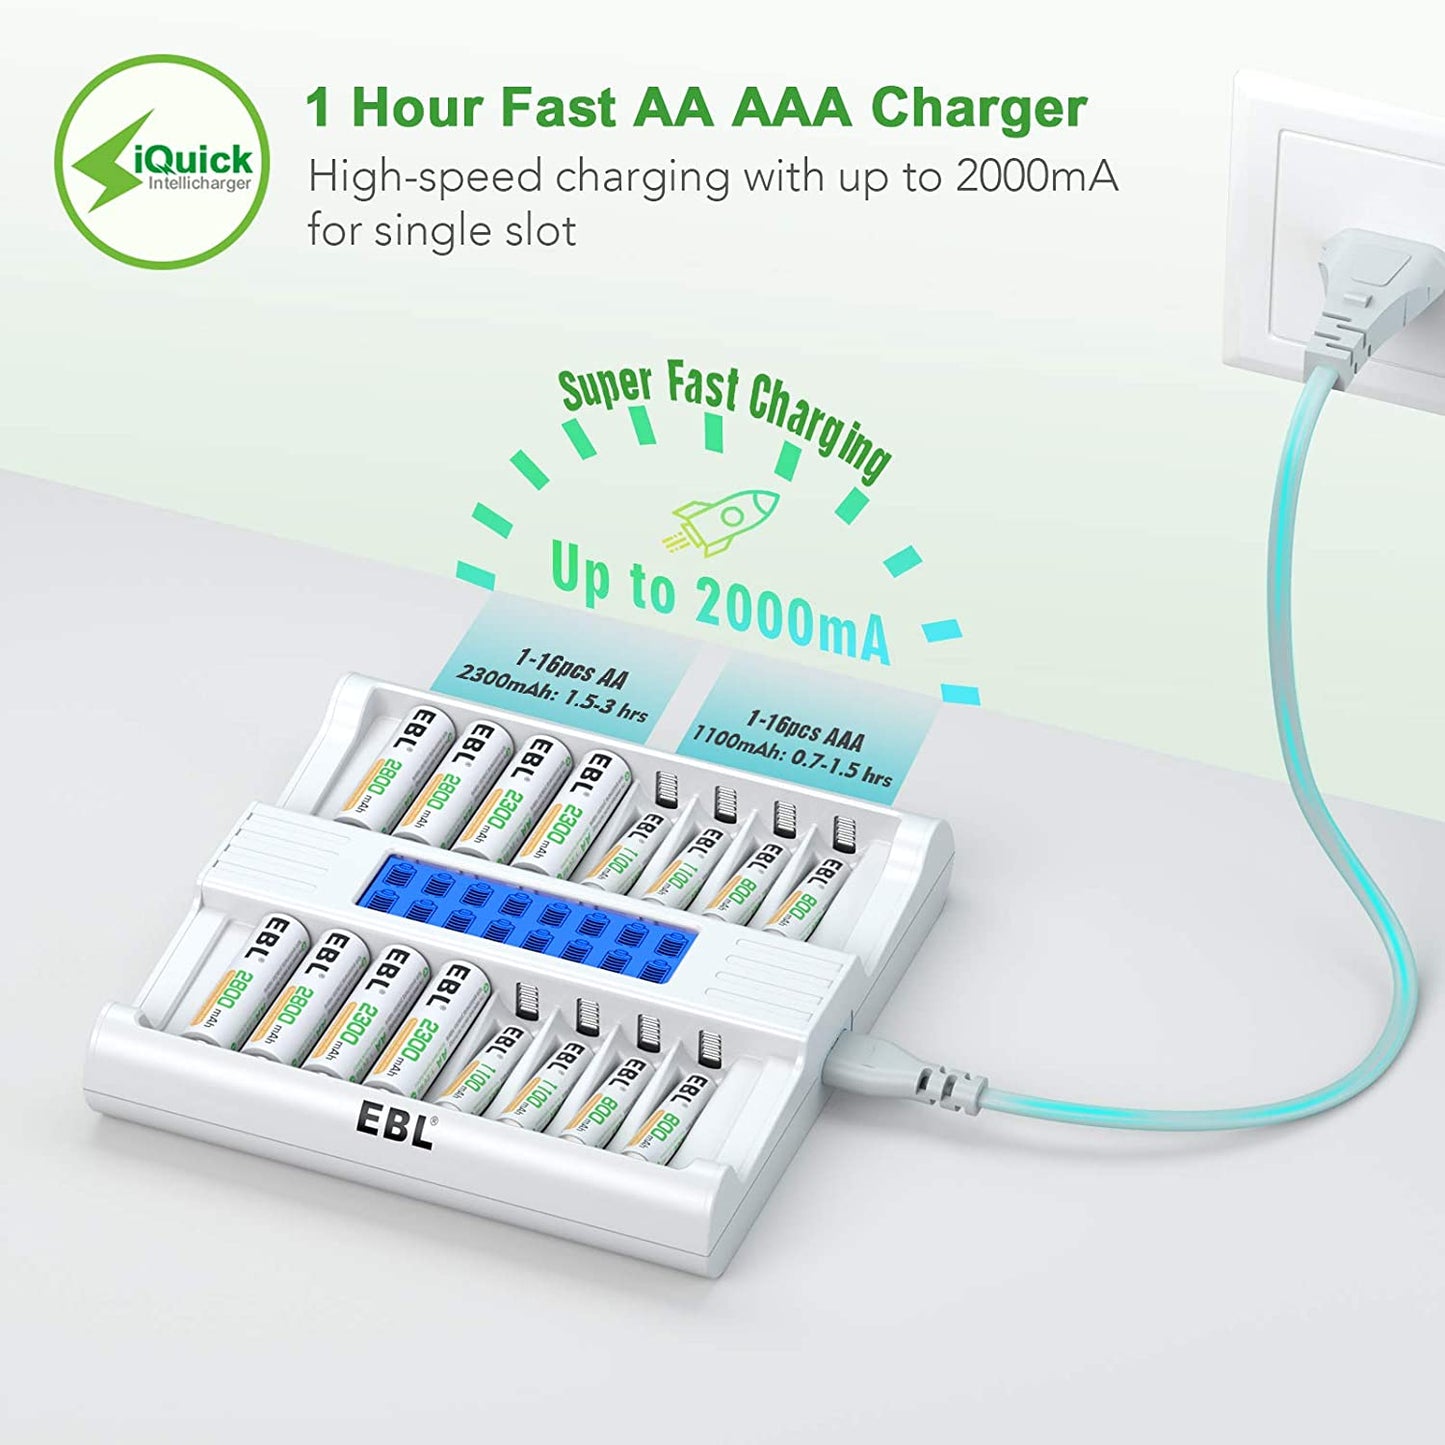 EBL TB-6178 16-Bay Smart Battery Charger with LCD Status Display, Independently Controlled Fast Charging Slots, and Built-In Overcharging Protection for AA AAA NiMH Rechargeable Batteries